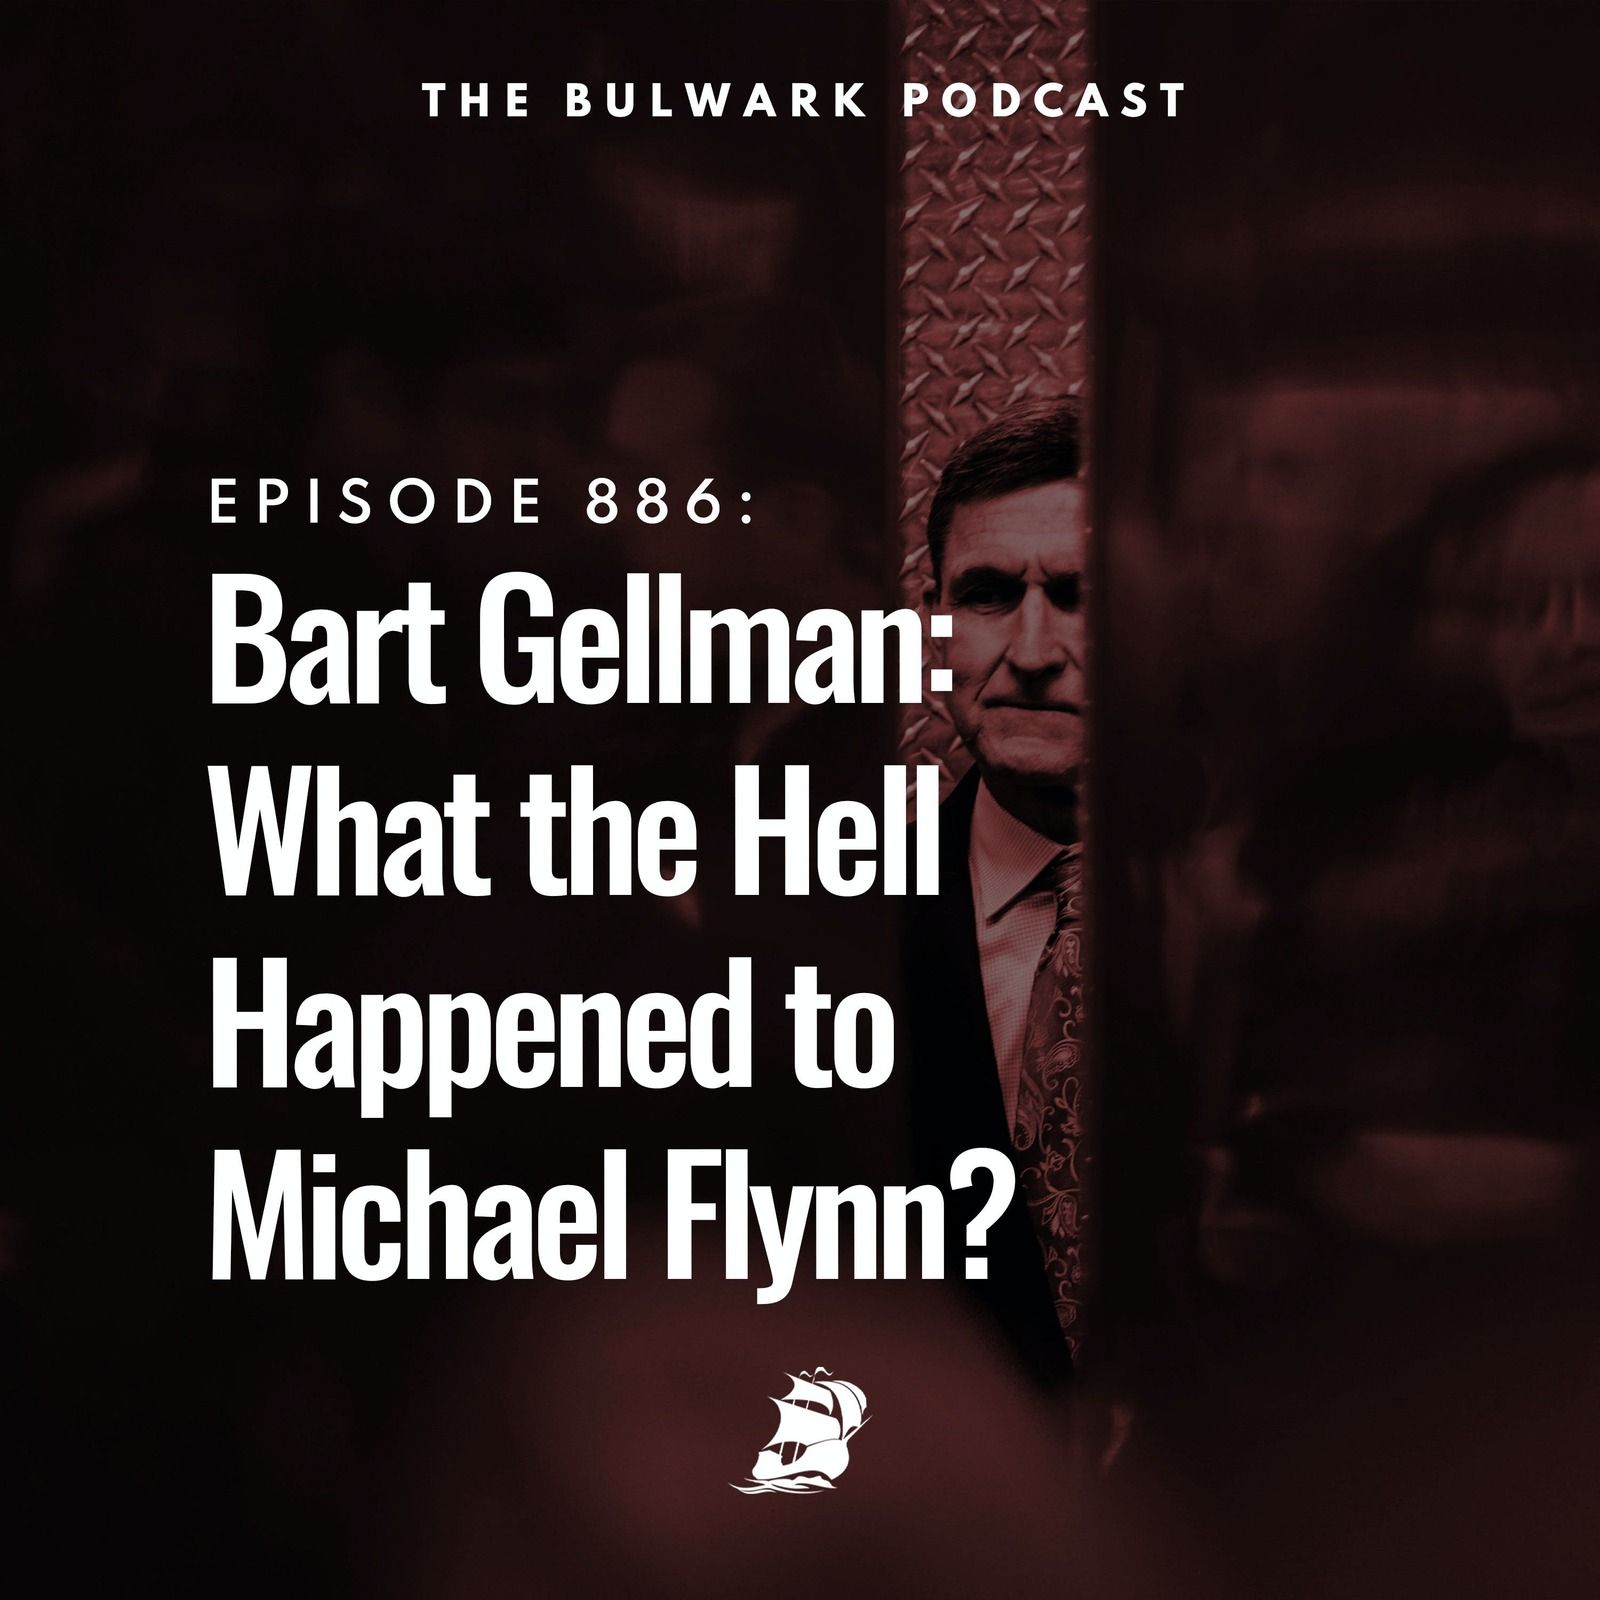 Bart Gellman: What the Hell Happened to Michael Flynn?